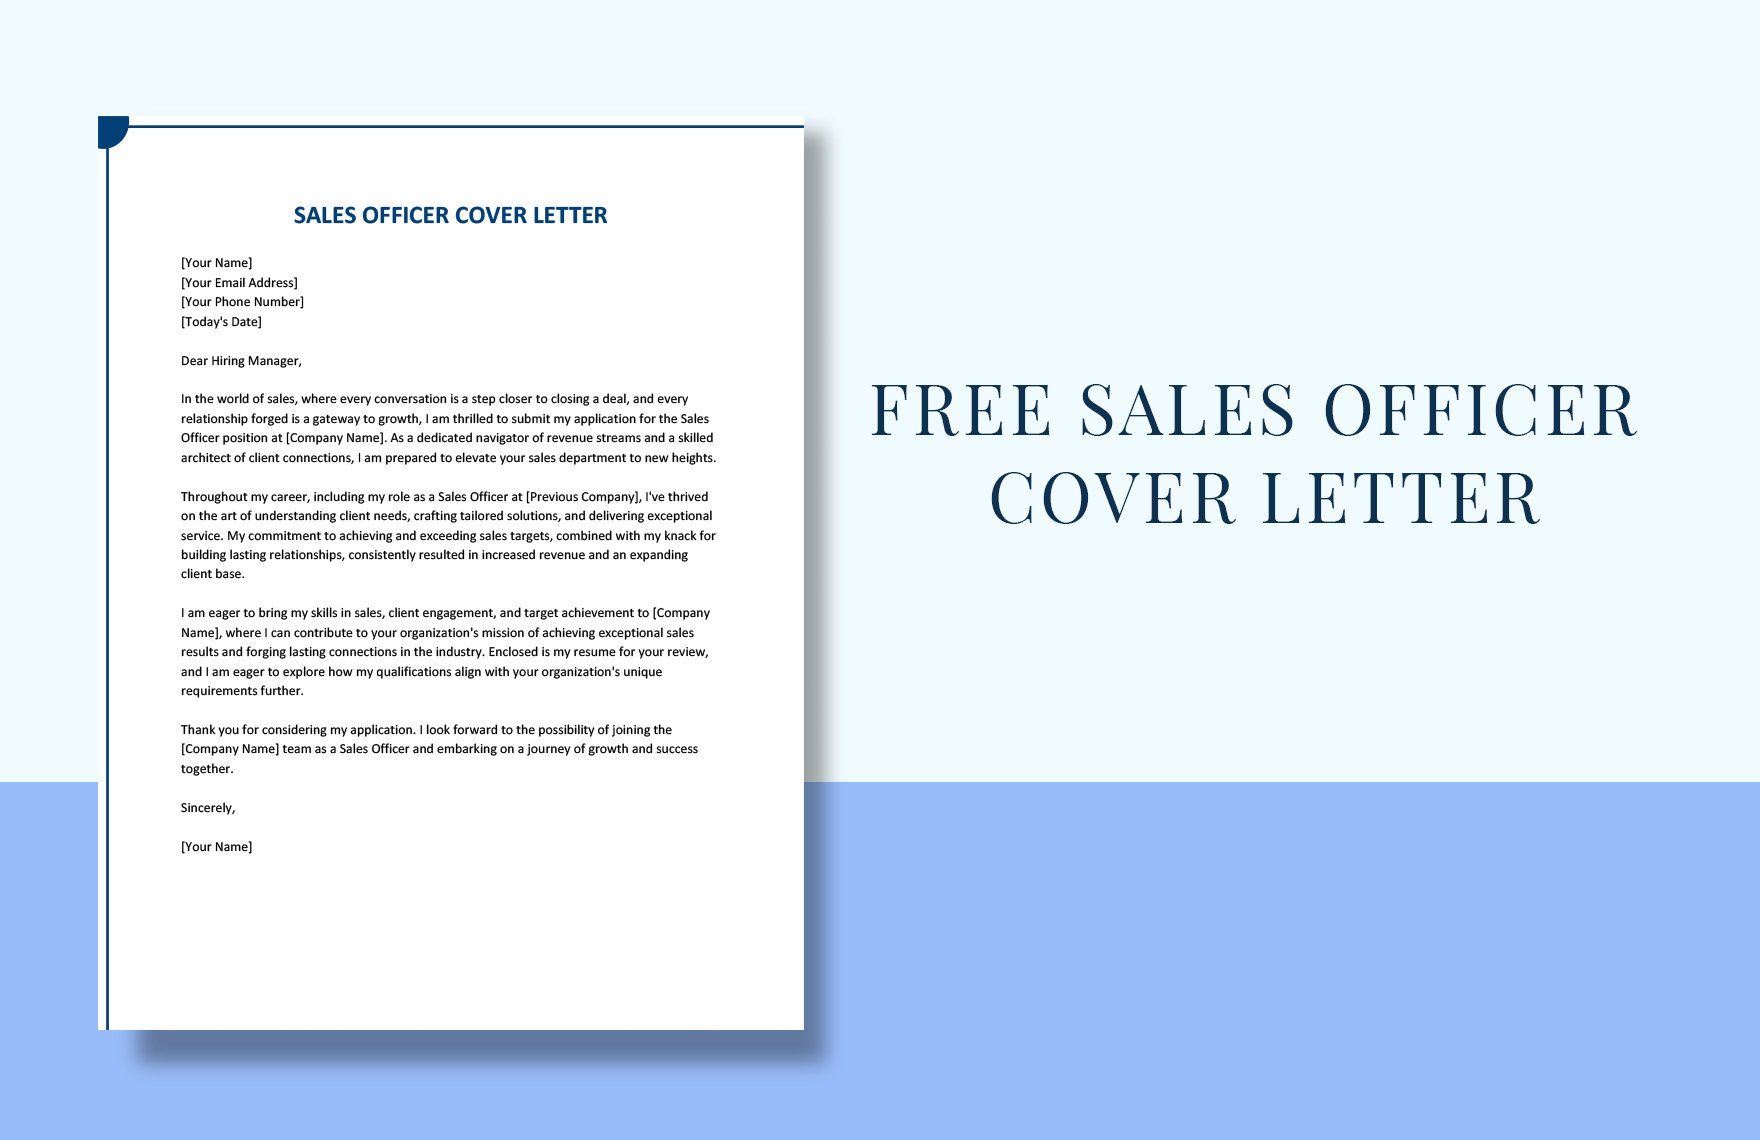 Sales Officer Cover Letter in Word, Google Docs